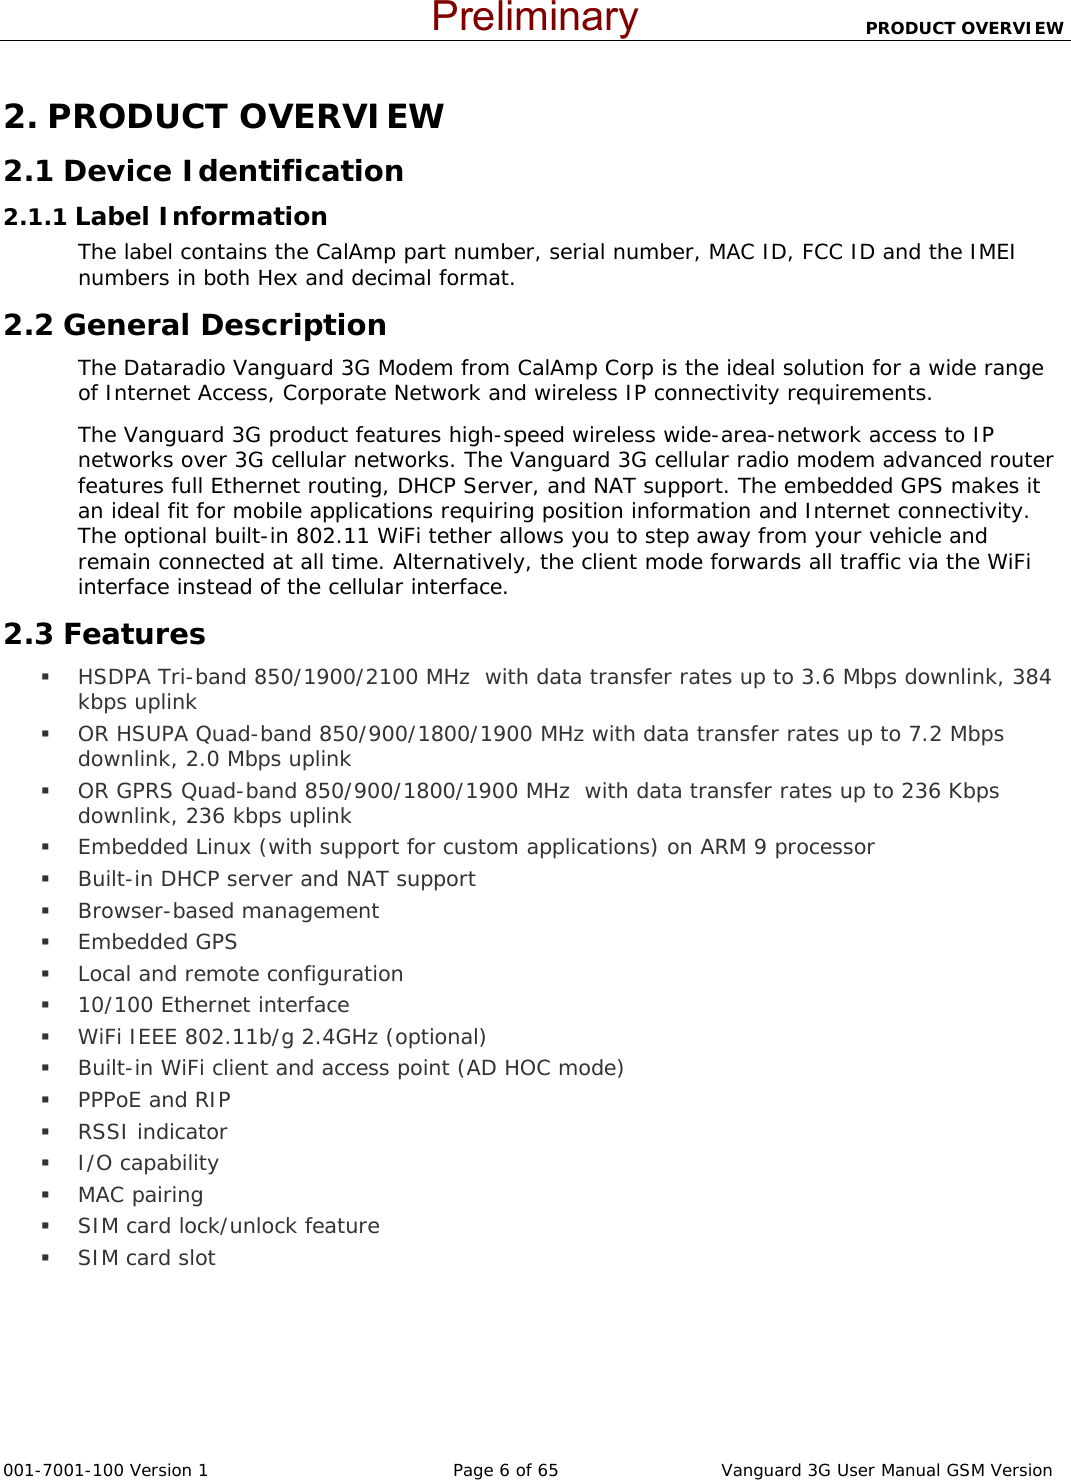                          PRODUCT OVERVIEW  001-7001-100 Version 1       Page 6 of 65       Vanguard 3G User Manual GSM Version 2. PRODUCT OVERVIEW 2.1 Device Identification 2.1.1 Label Information The label contains the CalAmp part number, serial number, MAC ID, FCC ID and the IMEI numbers in both Hex and decimal format.   2.2 General Description The Dataradio Vanguard 3G Modem from CalAmp Corp is the ideal solution for a wide range of Internet Access, Corporate Network and wireless IP connectivity requirements. The Vanguard 3G product features high-speed wireless wide-area-network access to IP networks over 3G cellular networks. The Vanguard 3G cellular radio modem advanced router features full Ethernet routing, DHCP Server, and NAT support. The embedded GPS makes it an ideal fit for mobile applications requiring position information and Internet connectivity.  The optional built-in 802.11 WiFi tether allows you to step away from your vehicle and remain connected at all time. Alternatively, the client mode forwards all traffic via the WiFi interface instead of the cellular interface. 2.3 Features  HSDPA Tri-band 850/1900/2100 MHz  with data transfer rates up to 3.6 Mbps downlink, 384 kbps uplink  OR HSUPA Quad-band 850/900/1800/1900 MHz with data transfer rates up to 7.2 Mbps downlink, 2.0 Mbps uplink  OR GPRS Quad-band 850/900/1800/1900 MHz  with data transfer rates up to 236 Kbps downlink, 236 kbps uplink  Embedded Linux (with support for custom applications) on ARM 9 processor  Built-in DHCP server and NAT support   Browser-based management   Embedded GPS  Local and remote configuration  10/100 Ethernet interface   WiFi IEEE 802.11b/g 2.4GHz (optional)  Built-in WiFi client and access point (AD HOC mode)  PPPoE and RIP  RSSI indicator  I/O capability   MAC pairing  SIM card lock/unlock feature   SIM card slot Preliminary